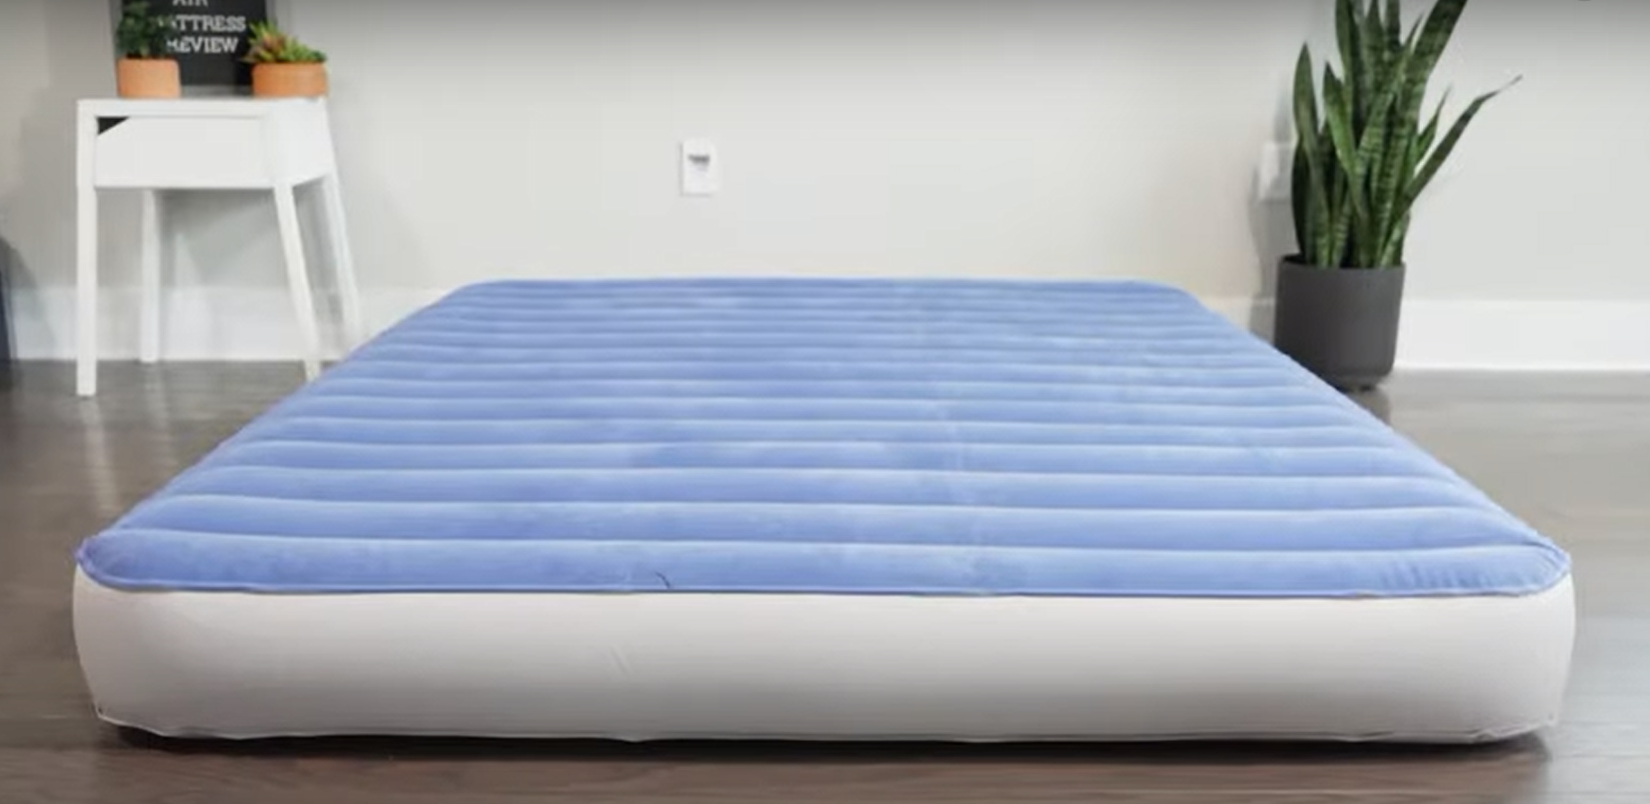 Air Mattress Warranty: What's Covered and What Isn't